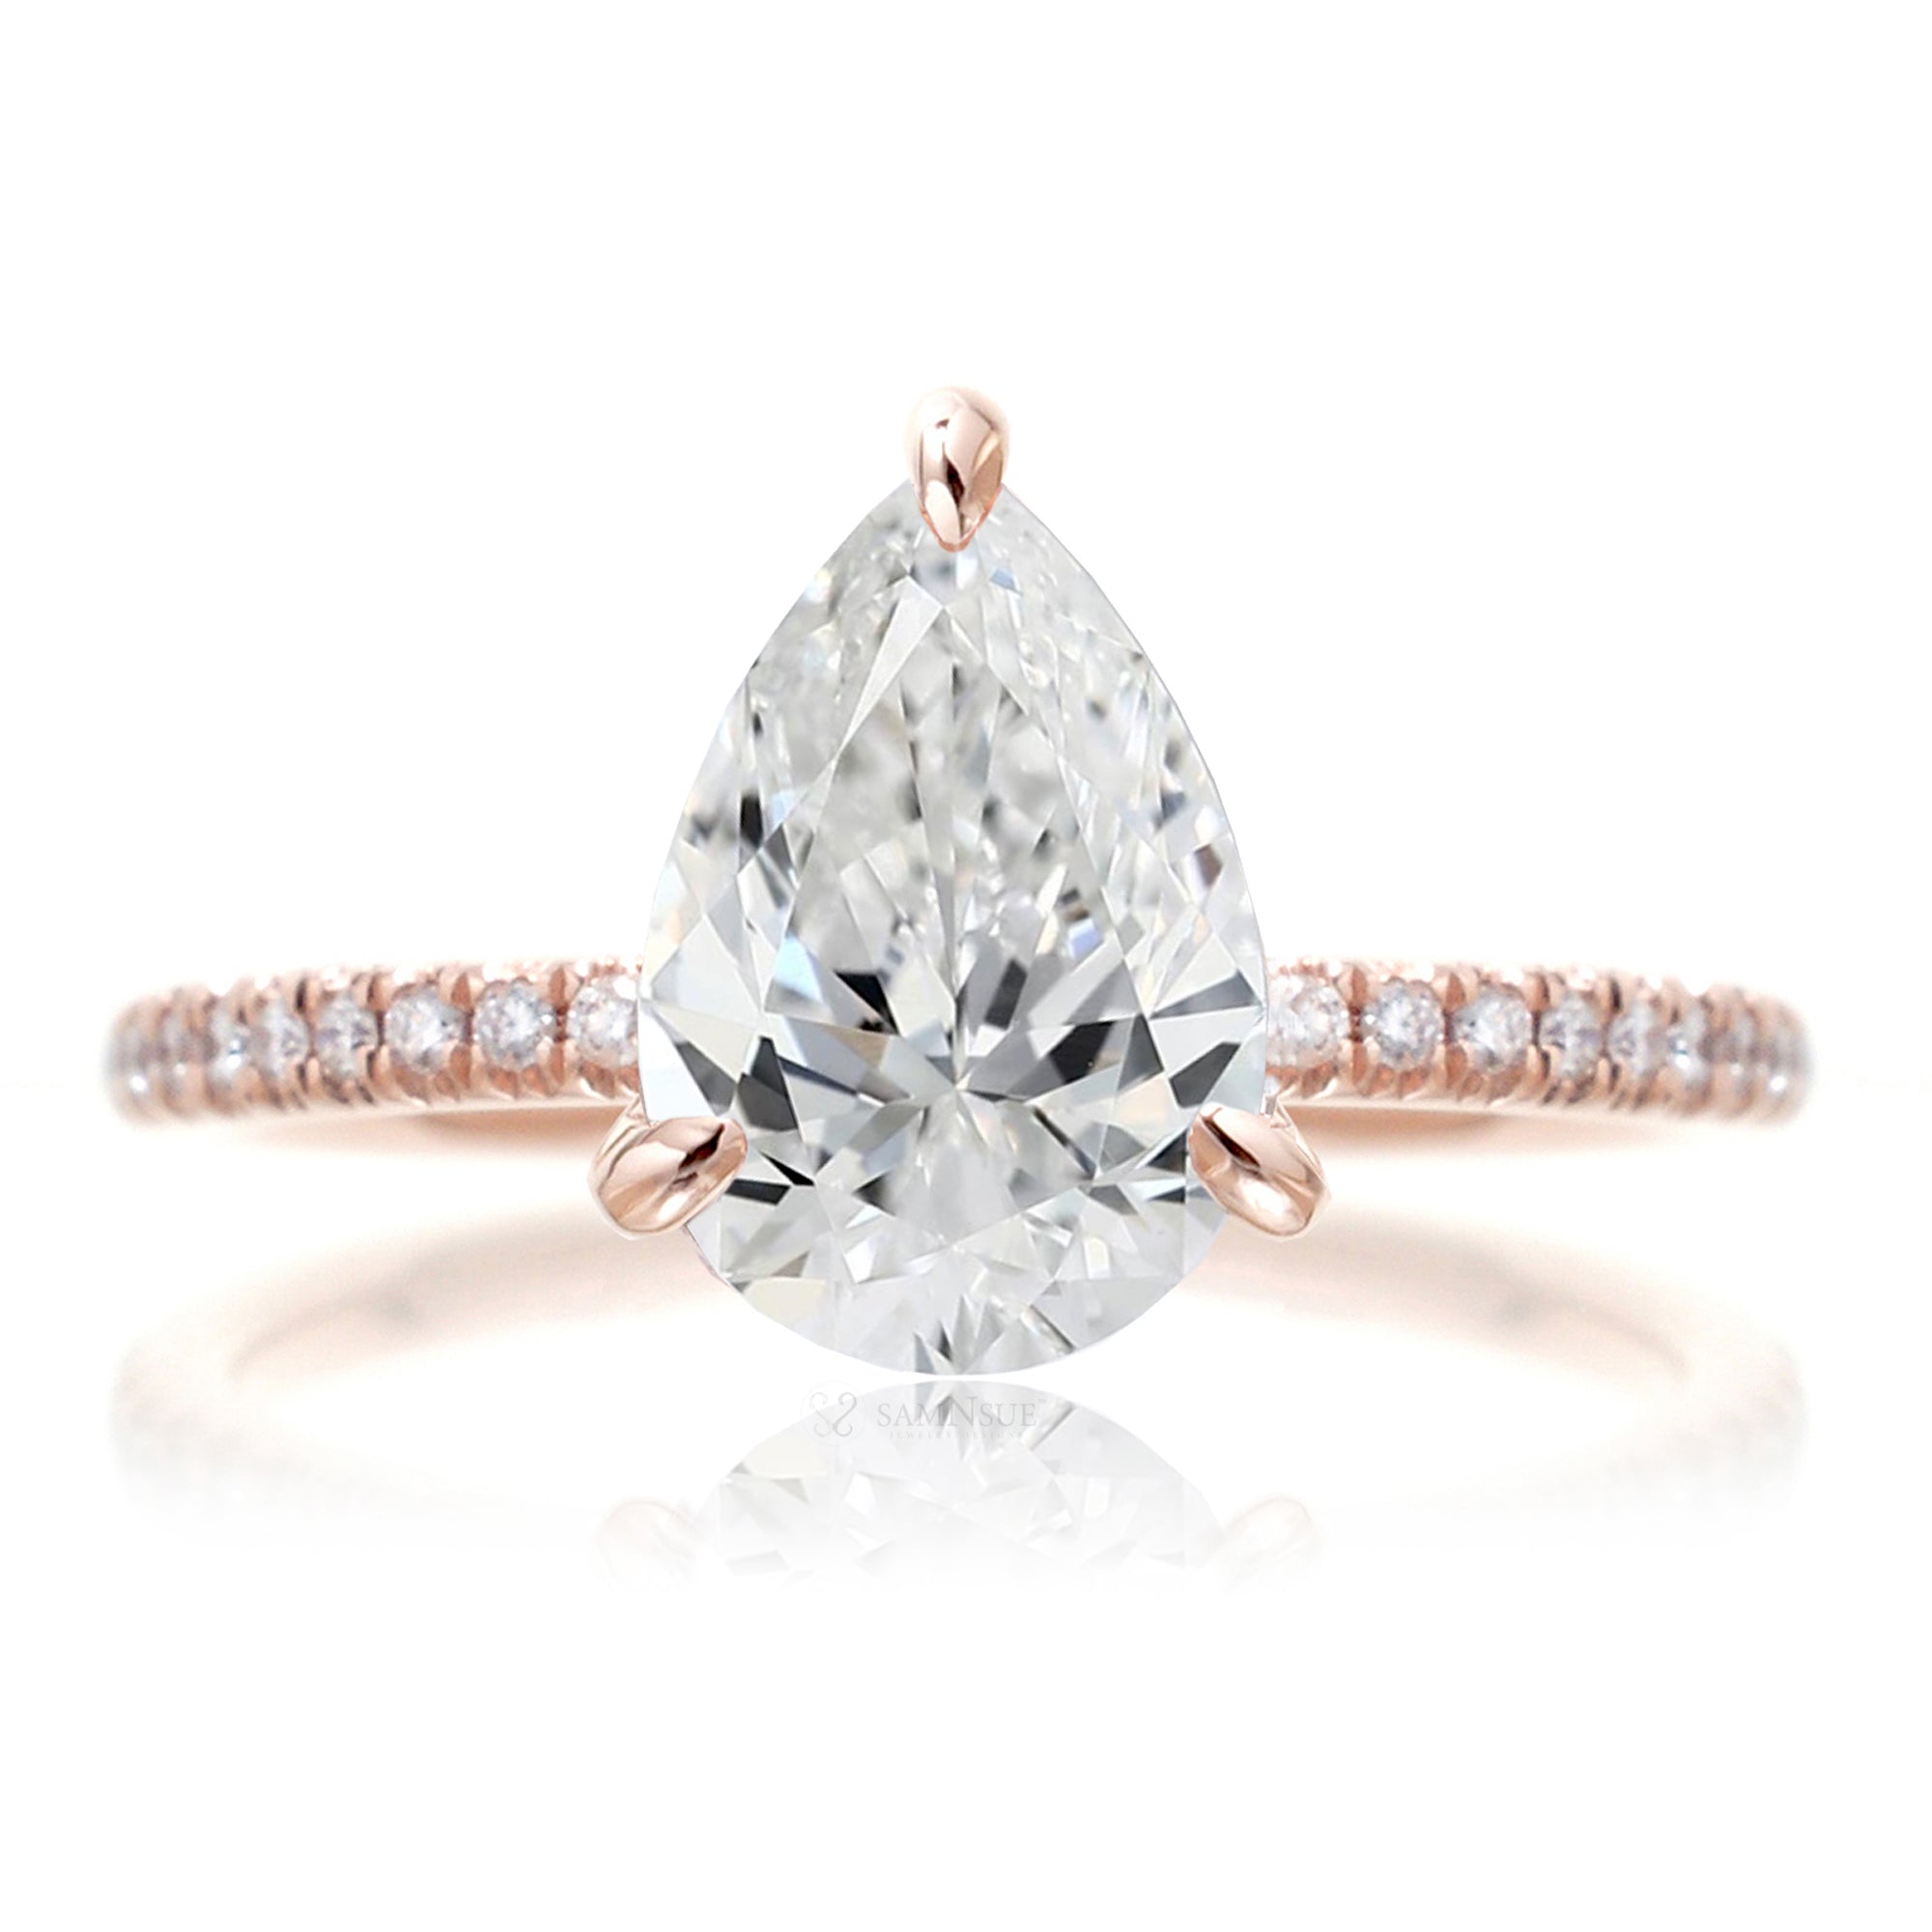 Pear cut lab-grown diamond engagement ring rose gold - The Ava